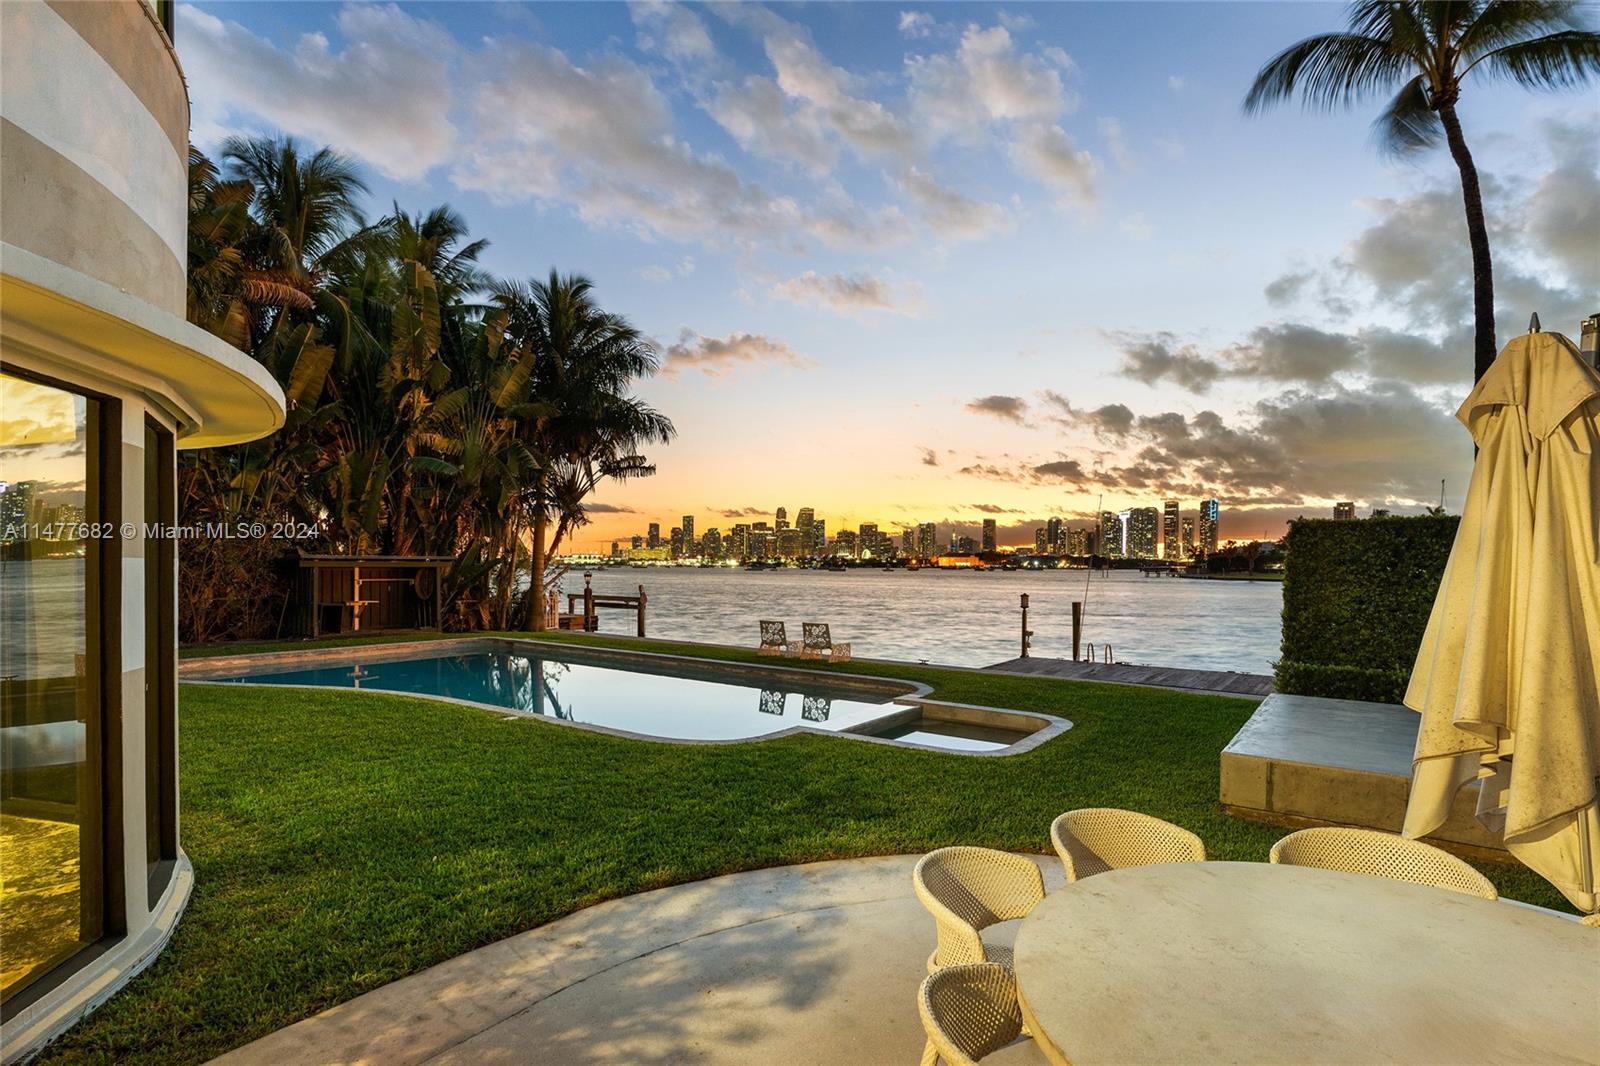 This charming 2-story Art Deco bayfront home sits on a 15,750 SF lot on the Venetian Islands & was designed by renowned architect L. Murray Dixon. An amazing opportunity to develop a beautiful new estate w/open Biscayne Bay & downtown sunset views or renovate the existing 4BR/5+1 BA home. Gated entry, original stone floors, open living room w/fireplace & direct bay views & separate dining area, plus a family room. Includes a detached 1BR/1BA guest house w/living/dining area. 2nd floor bay-facing principal suite w/large windows & views over the open bay & downtown, plus dual principal bathrooms & large walk-in closet. 2 other upstairs bedrooms w/en-suite bathrooms & private terraces. Large pool, lounge areas, summer kitchen, 90’ WF, private dock & ocean access. Amazing central location.